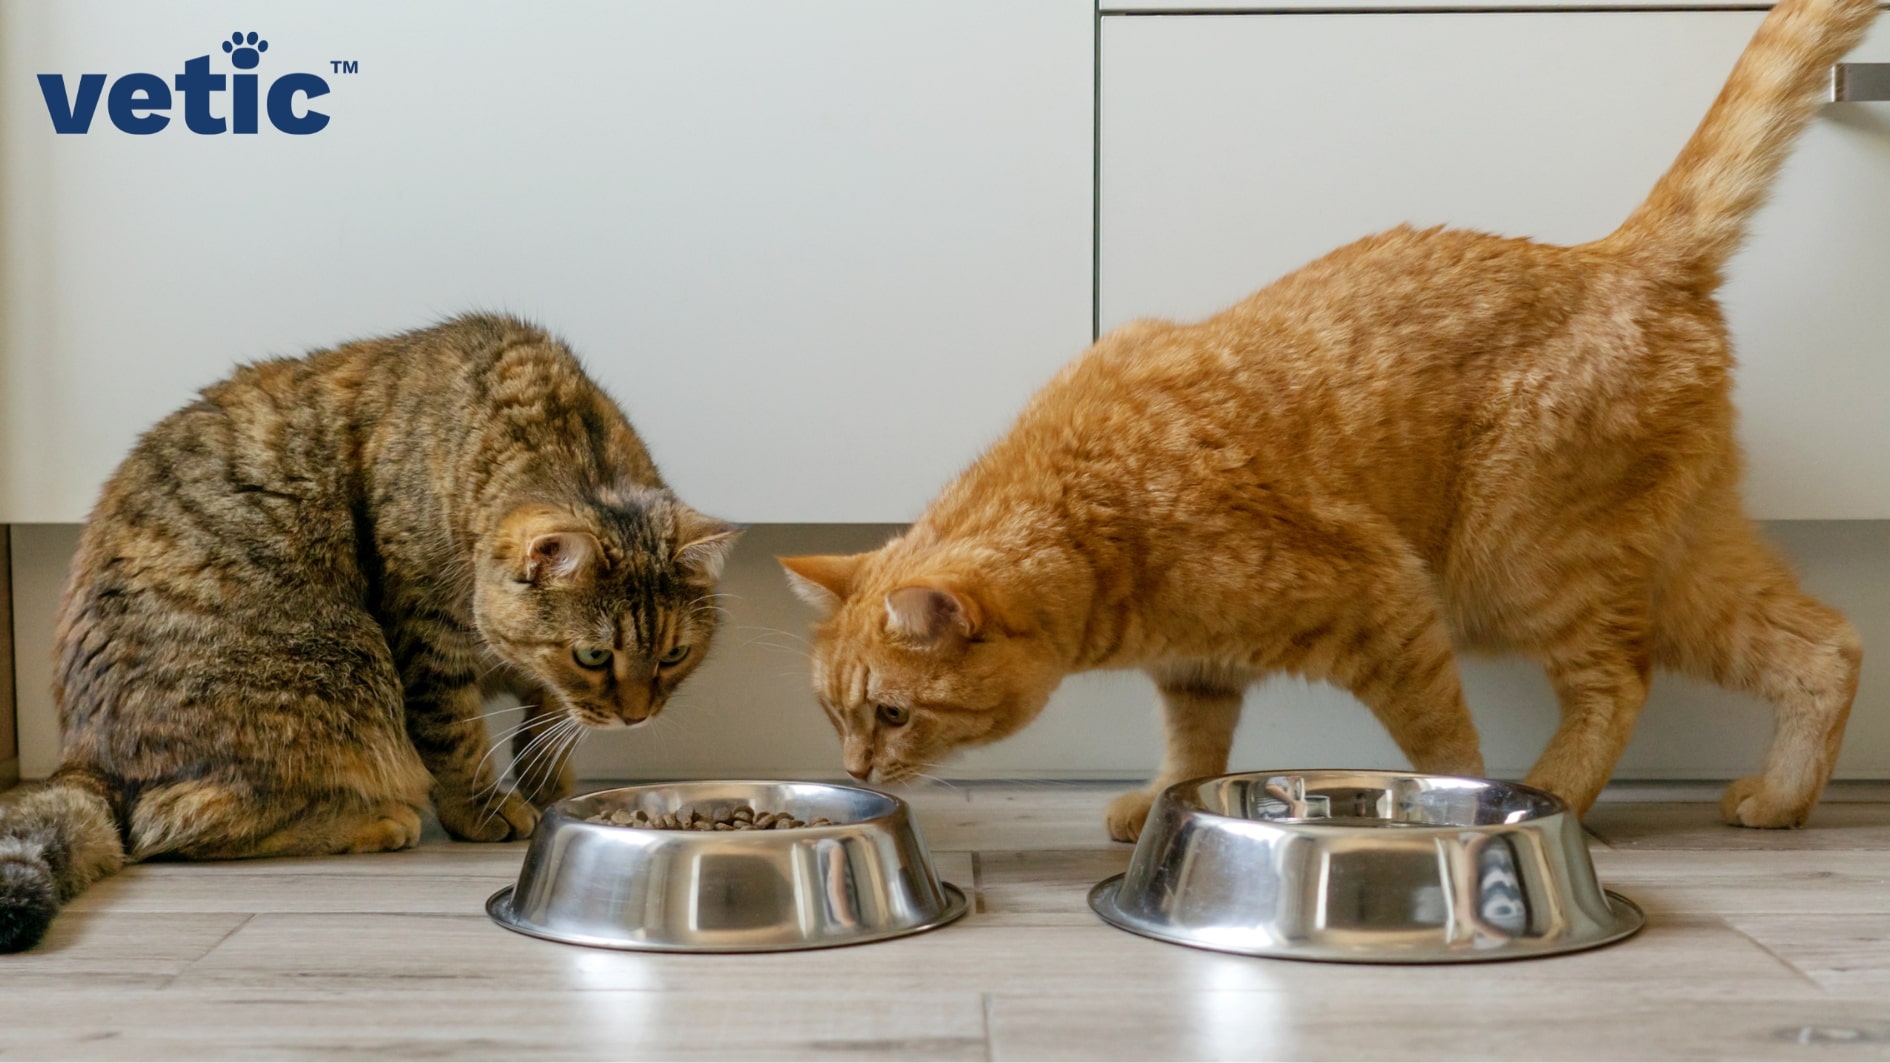 An orange tabby and a tortoise shell cat. The orange tabby is sniffing the food bowl in front of the other cat since it's food bowl is empty. the tortoise shell cat looks at the tabby displeased. Cough and cold in cats can spread quickly in multi-cat households through direct and indirect contact